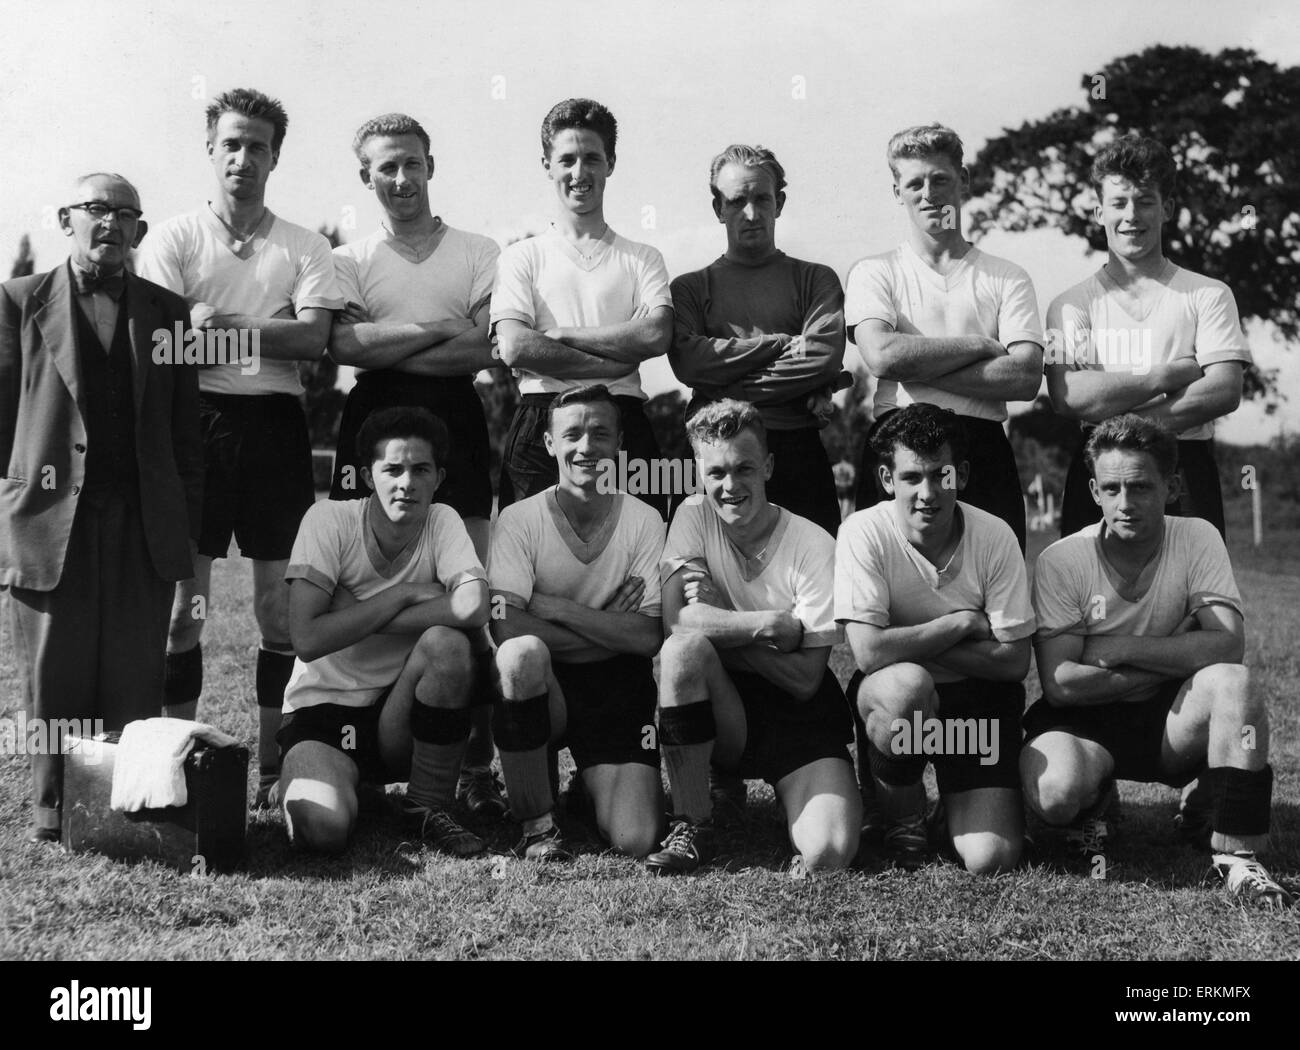 Alvechurch Football club team group pic. Back row left to right: Benjam (trainer), C Steadman, Houghton, D Staedman, Gould, Geer and Wilmmott. Front row: Tayloy, Shaw, Folkes, Lavin and Walcroft. 2nd September 1958. Stock Photo